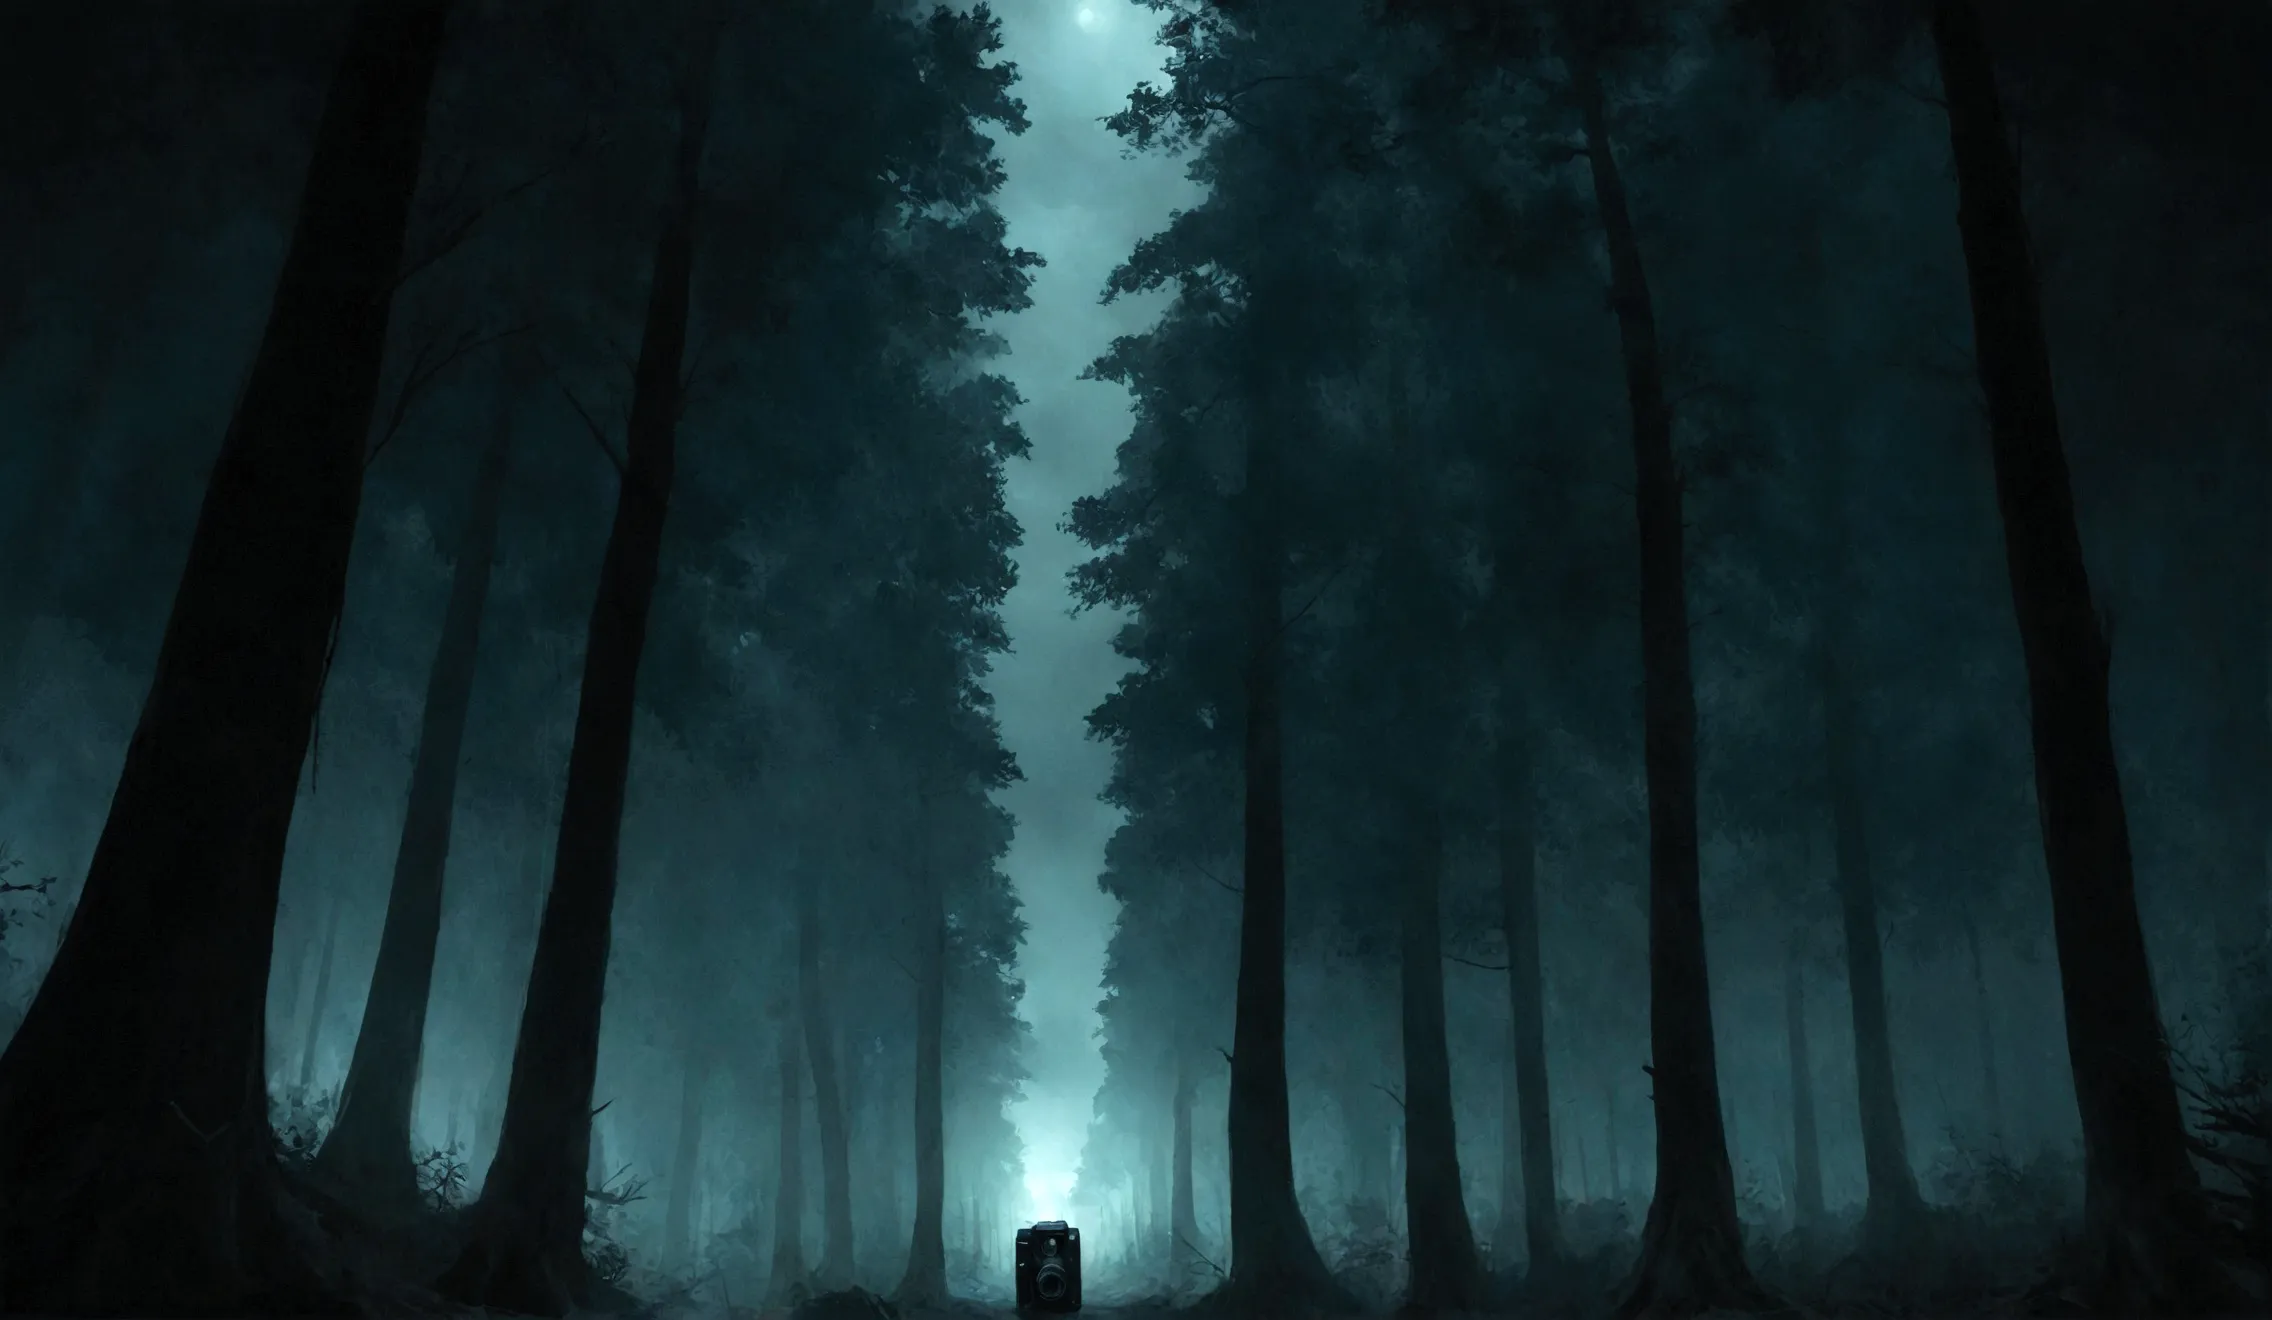 eeire forest at night, high trees, dark montain, dark atmosphere, horror story, camera pointing up